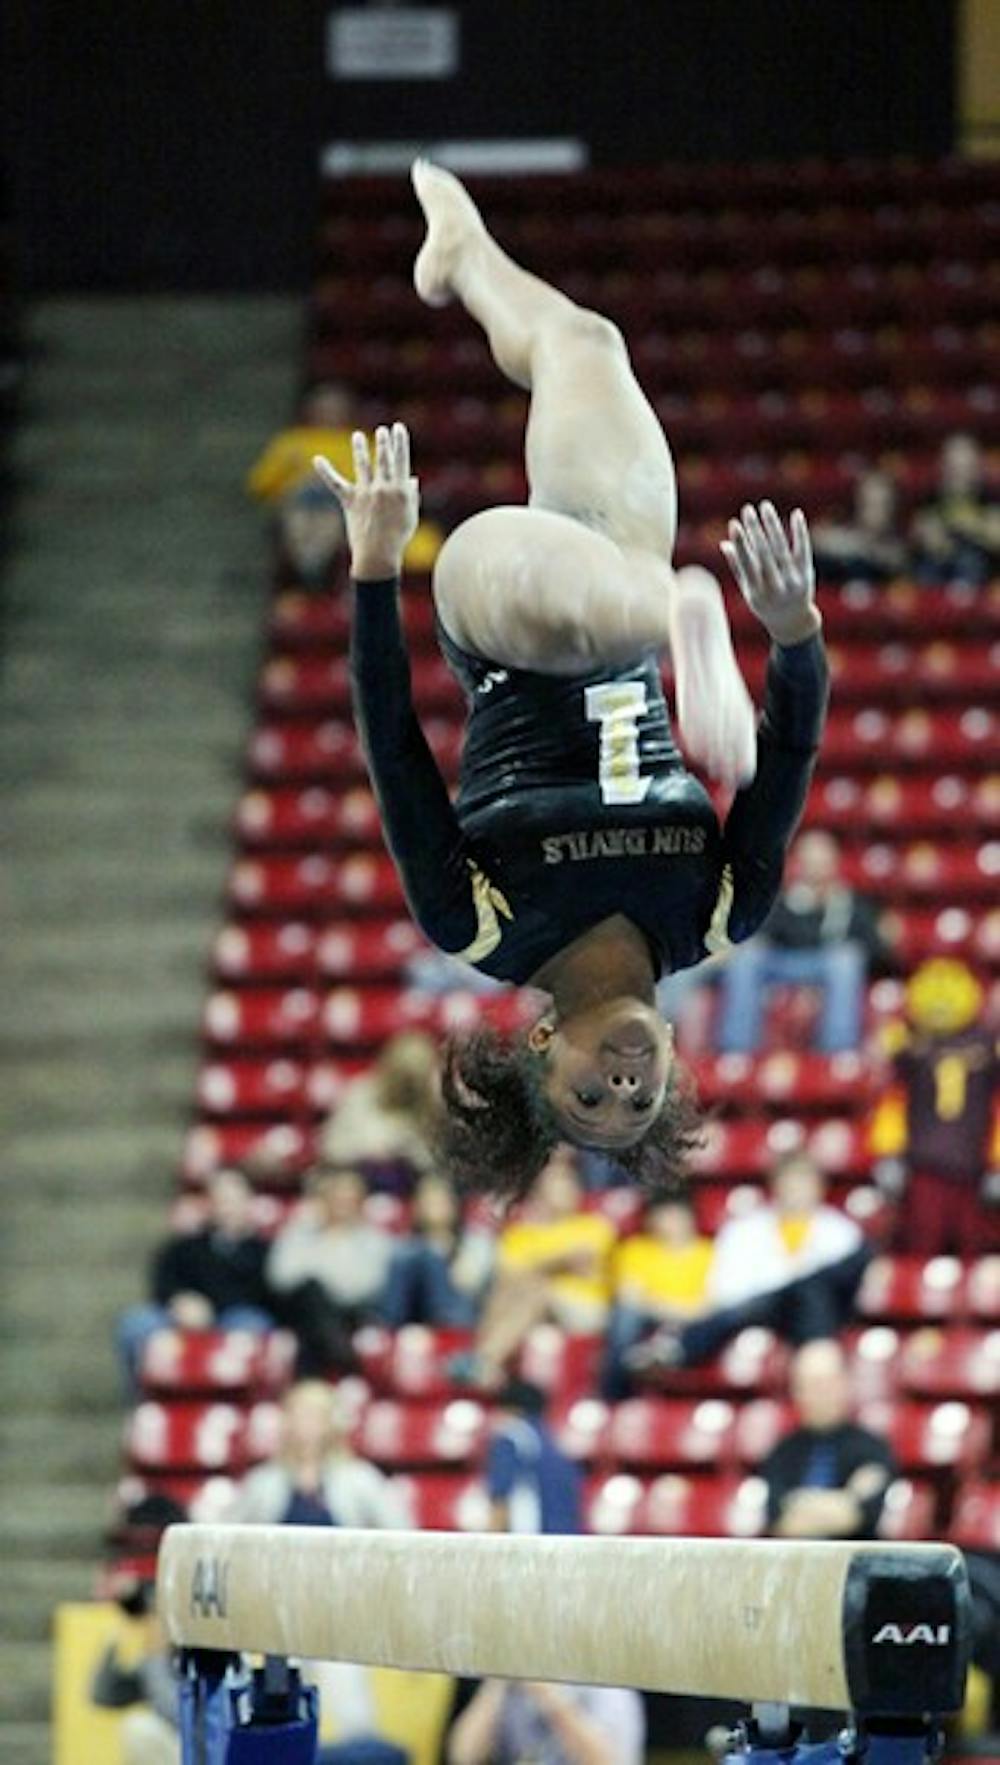 Beaté Jones performs a flip on the balance beam in a meet against UA on Jan. 27. Jones and the Sun Devils look to maintain their success as they head into the second half of the season. (Photo by Beth Easterbrook)